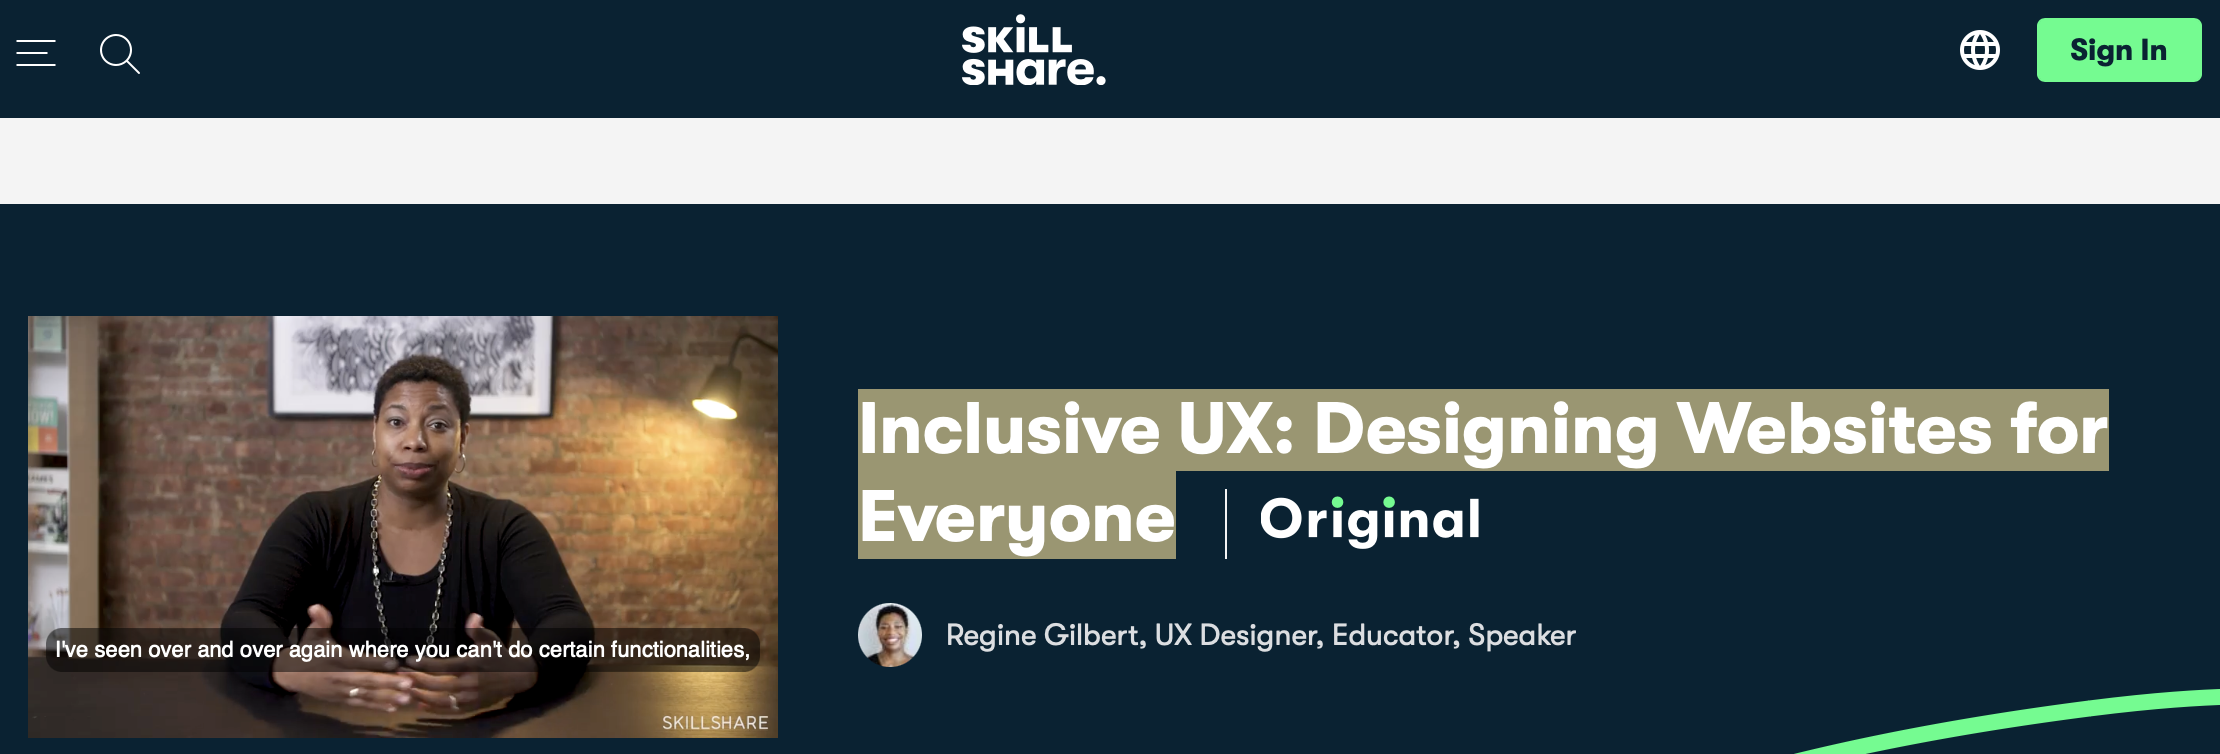 Inclusive UX Designing Websites for Everyone